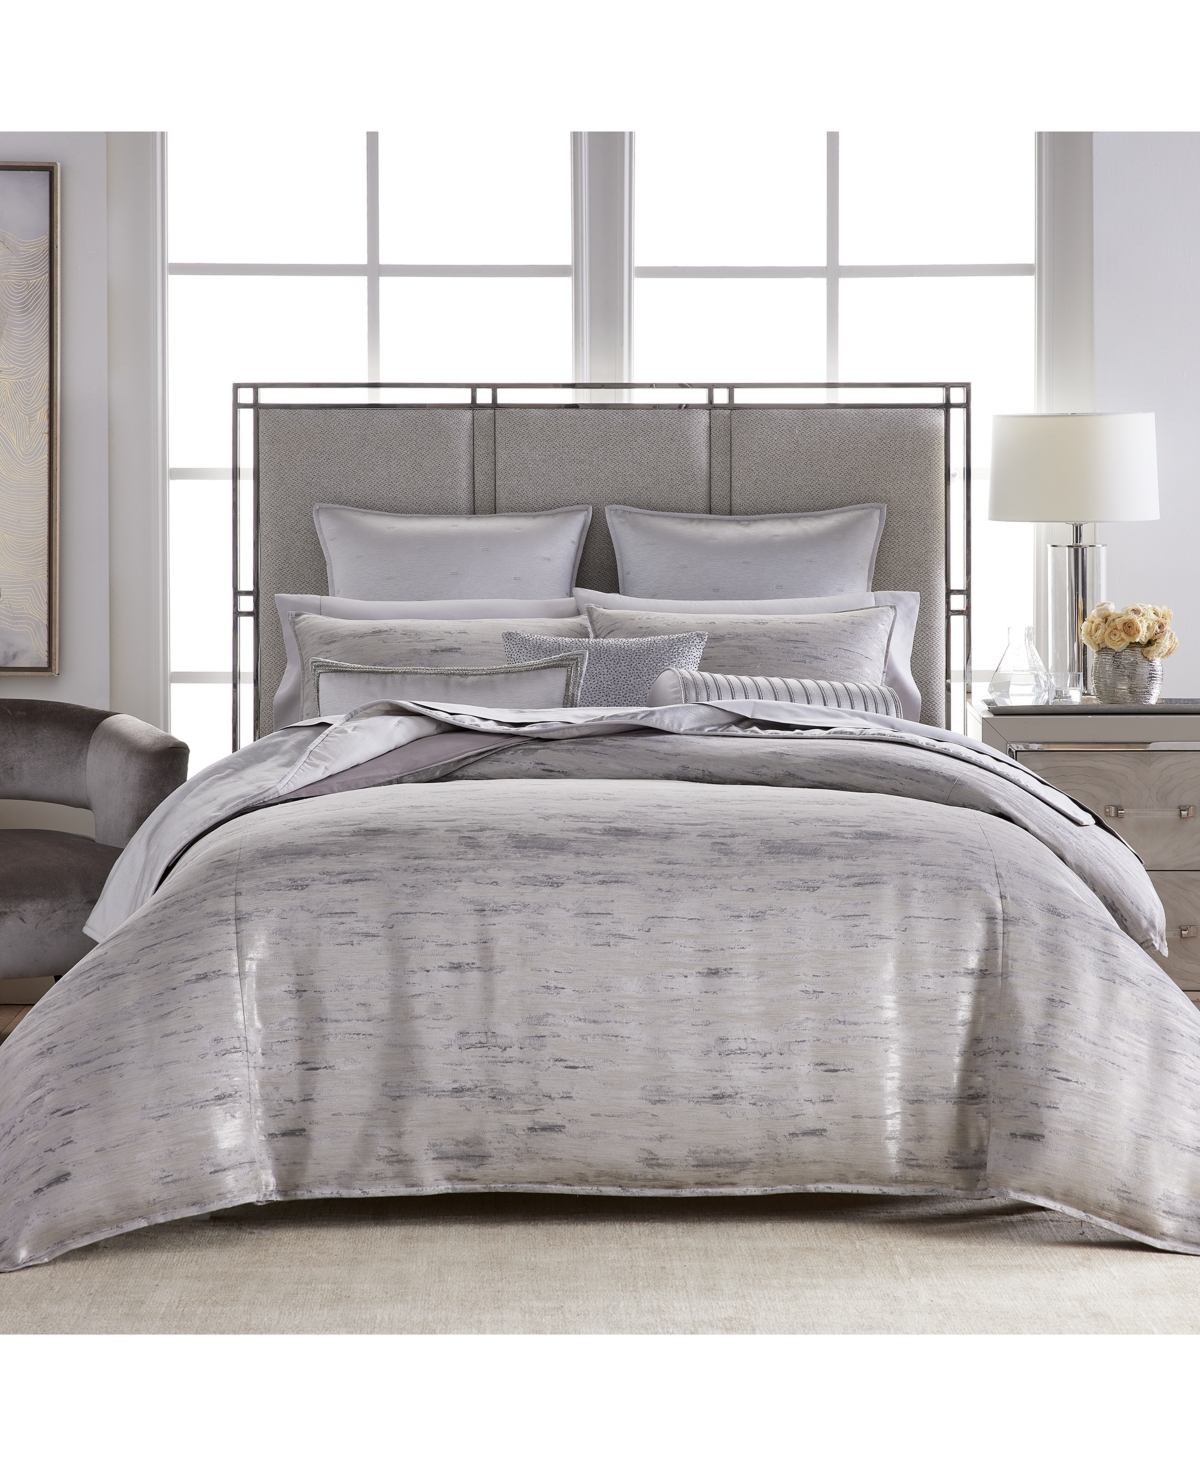 Hotel Collection Impasto Stone 3-pc. Duvet Cover Set, Full/queen, Created For Macy's In Grey